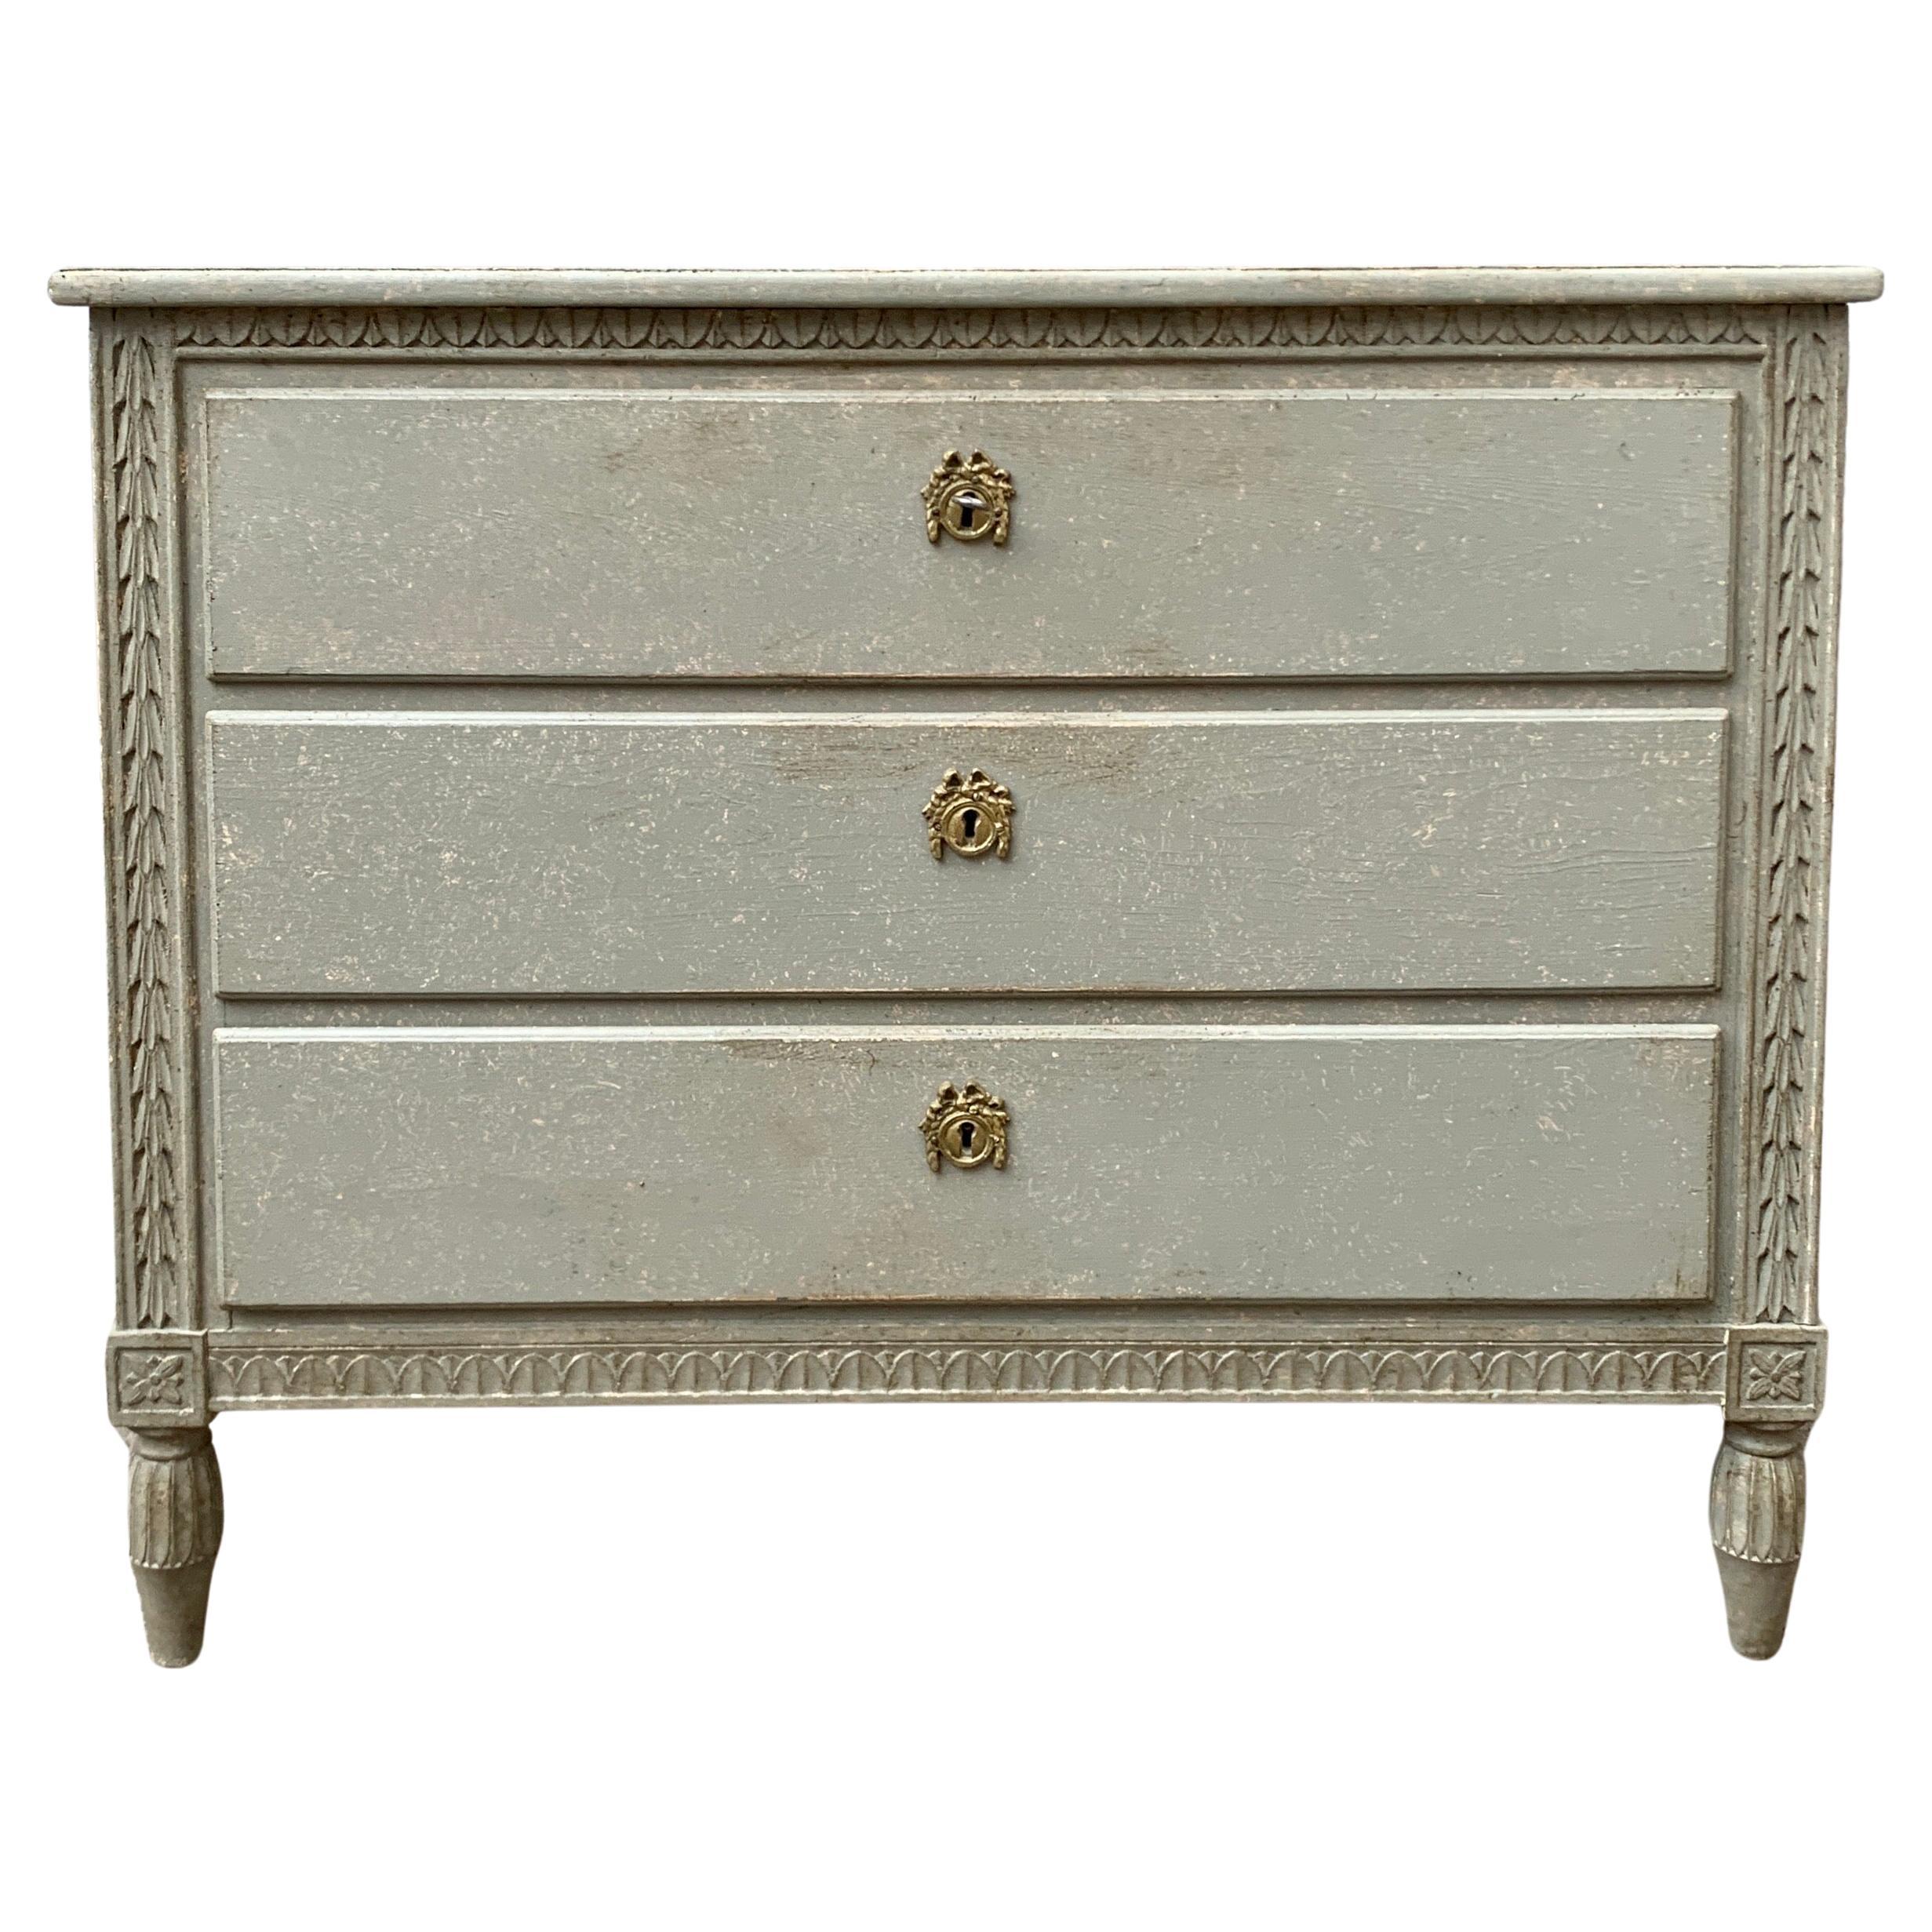 An early 20th century grey painted Scandinavian chest of drawers from Sweden.
This 3 drawer dresser has a nicely carved leaf pattern around the front and on the apron, plus a working original key and locks. It has an extra drawer inside the top